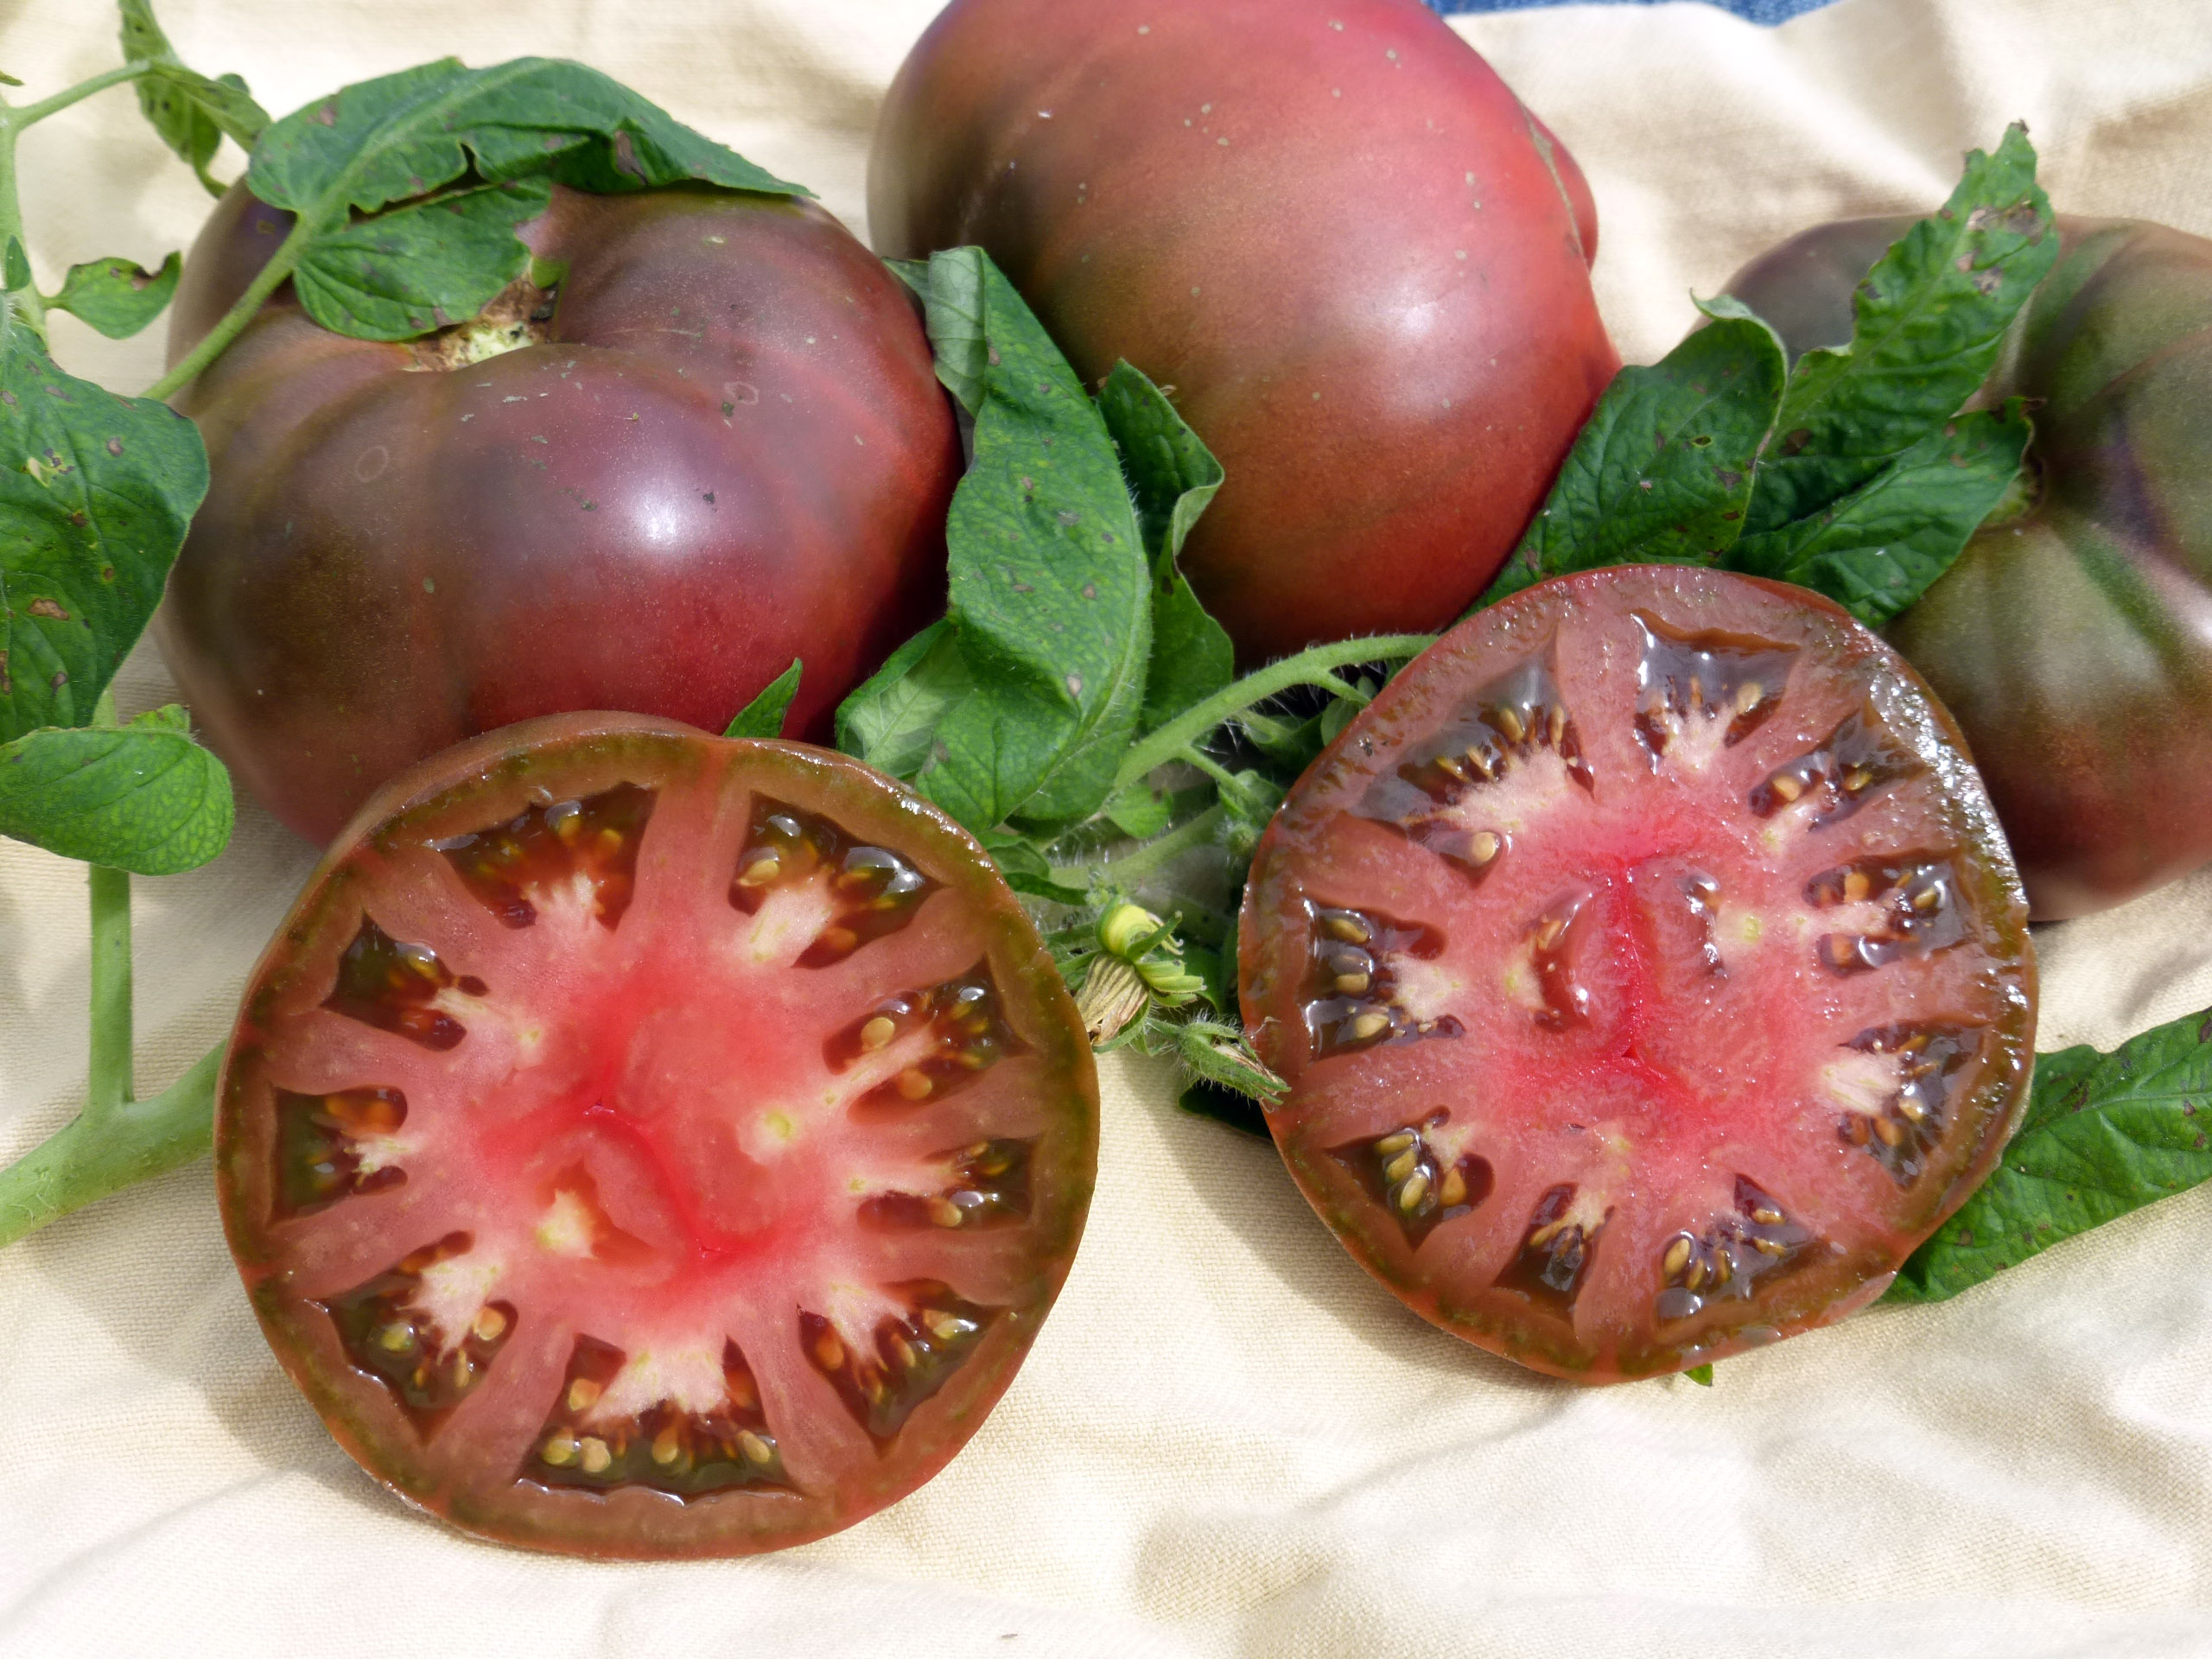 Brandywine Heirloom Tomatoes Information and Facts